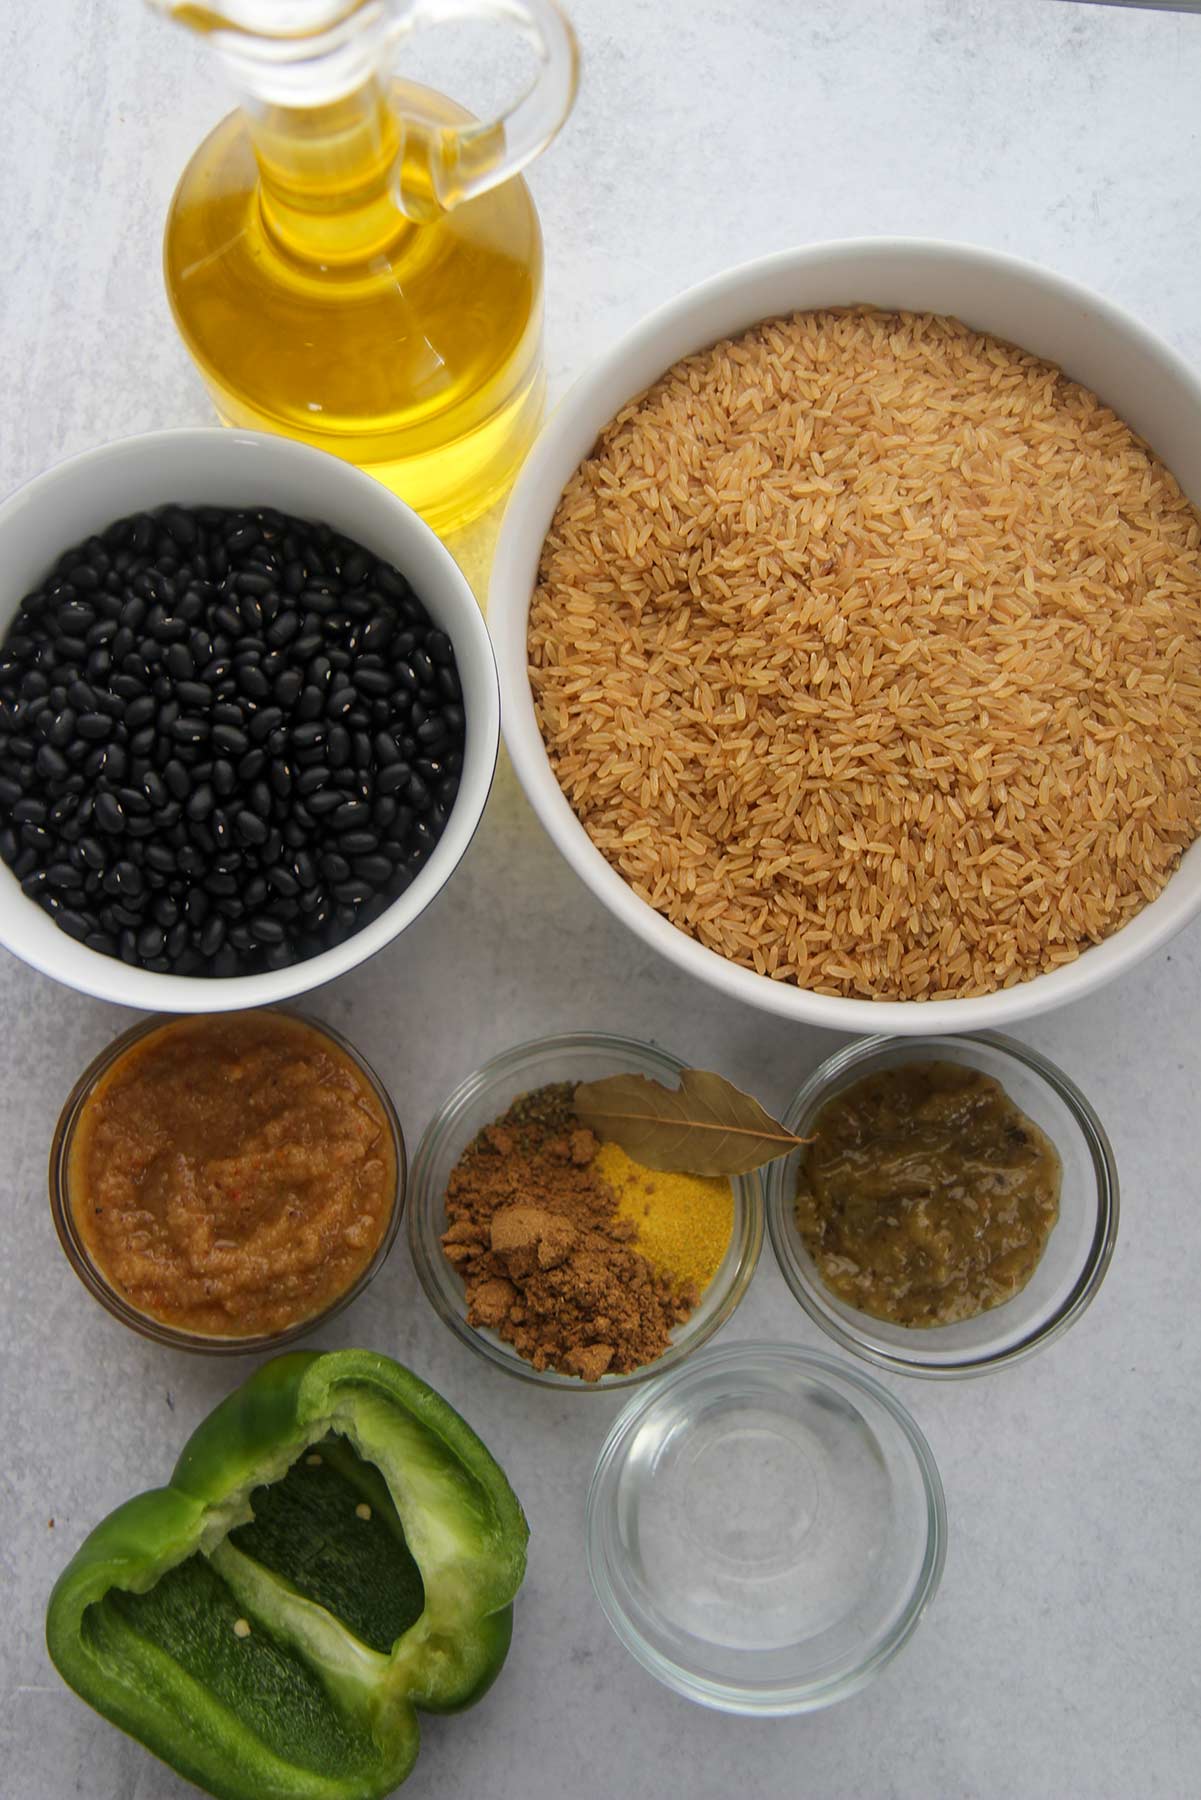 ingredients for congri, dried black beans, brown rice, small bowls with spices, vinegar, bay leaf, sofrito, and recaito. Oil and a green bell pepper. 